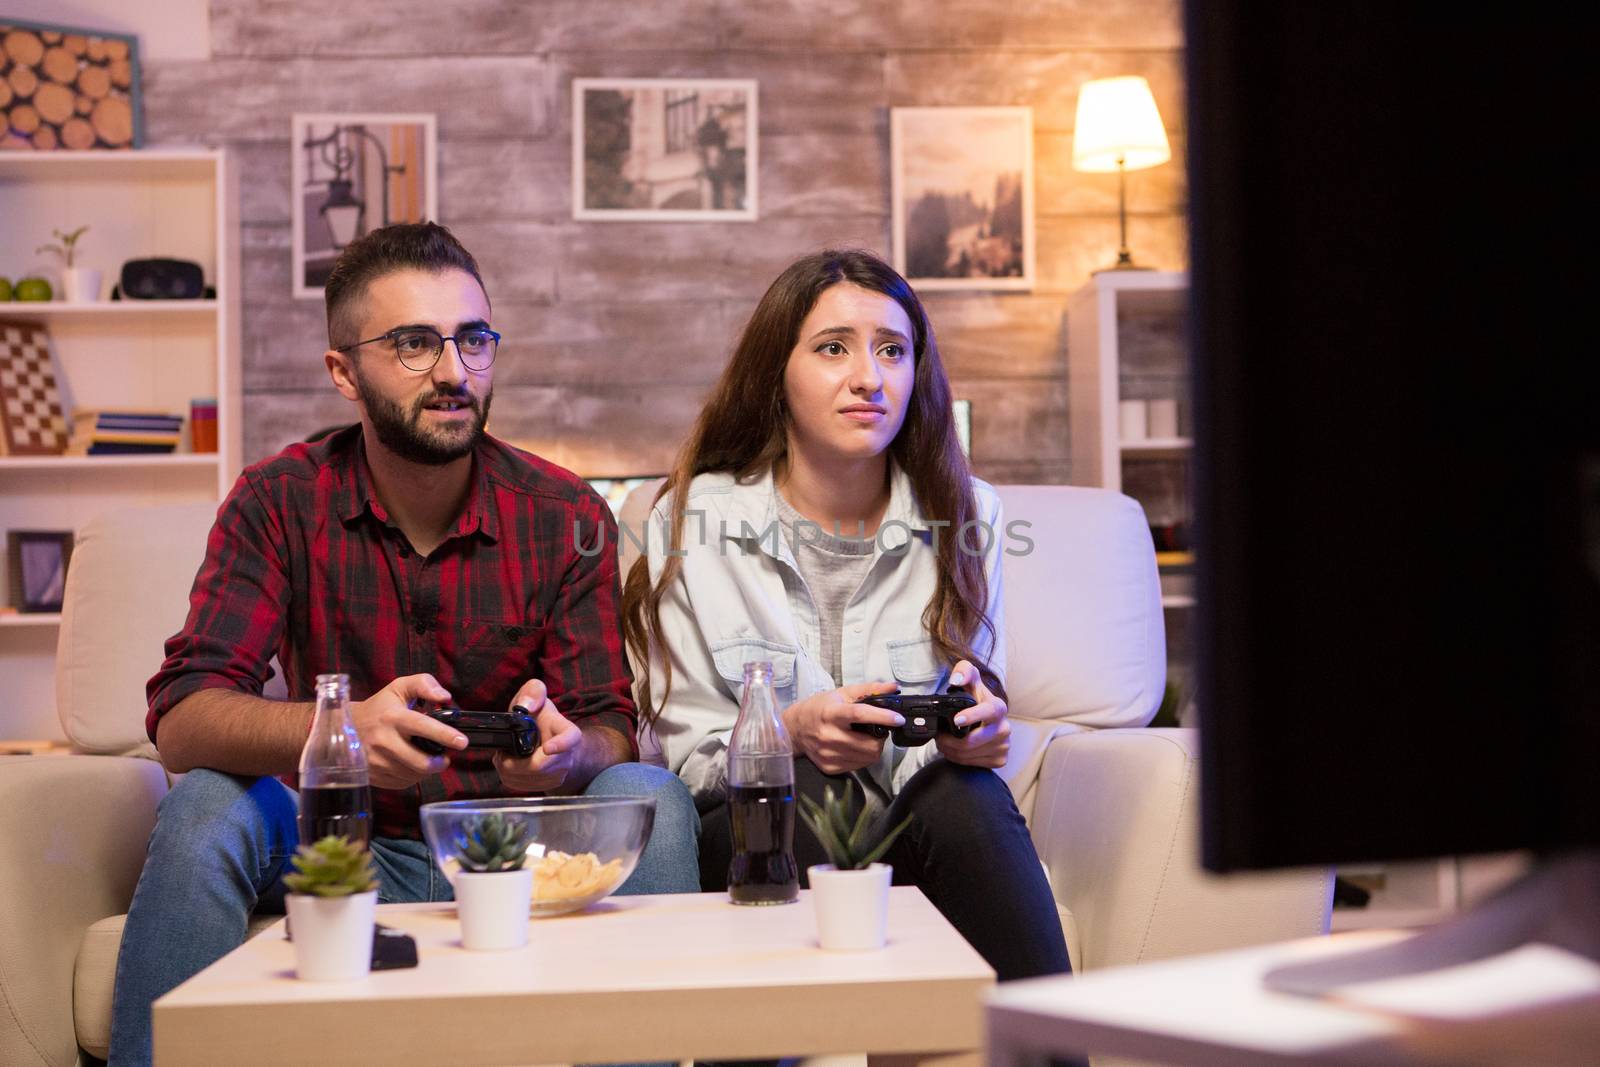 Couple enjoying their time together while playing video games on television with controllers.